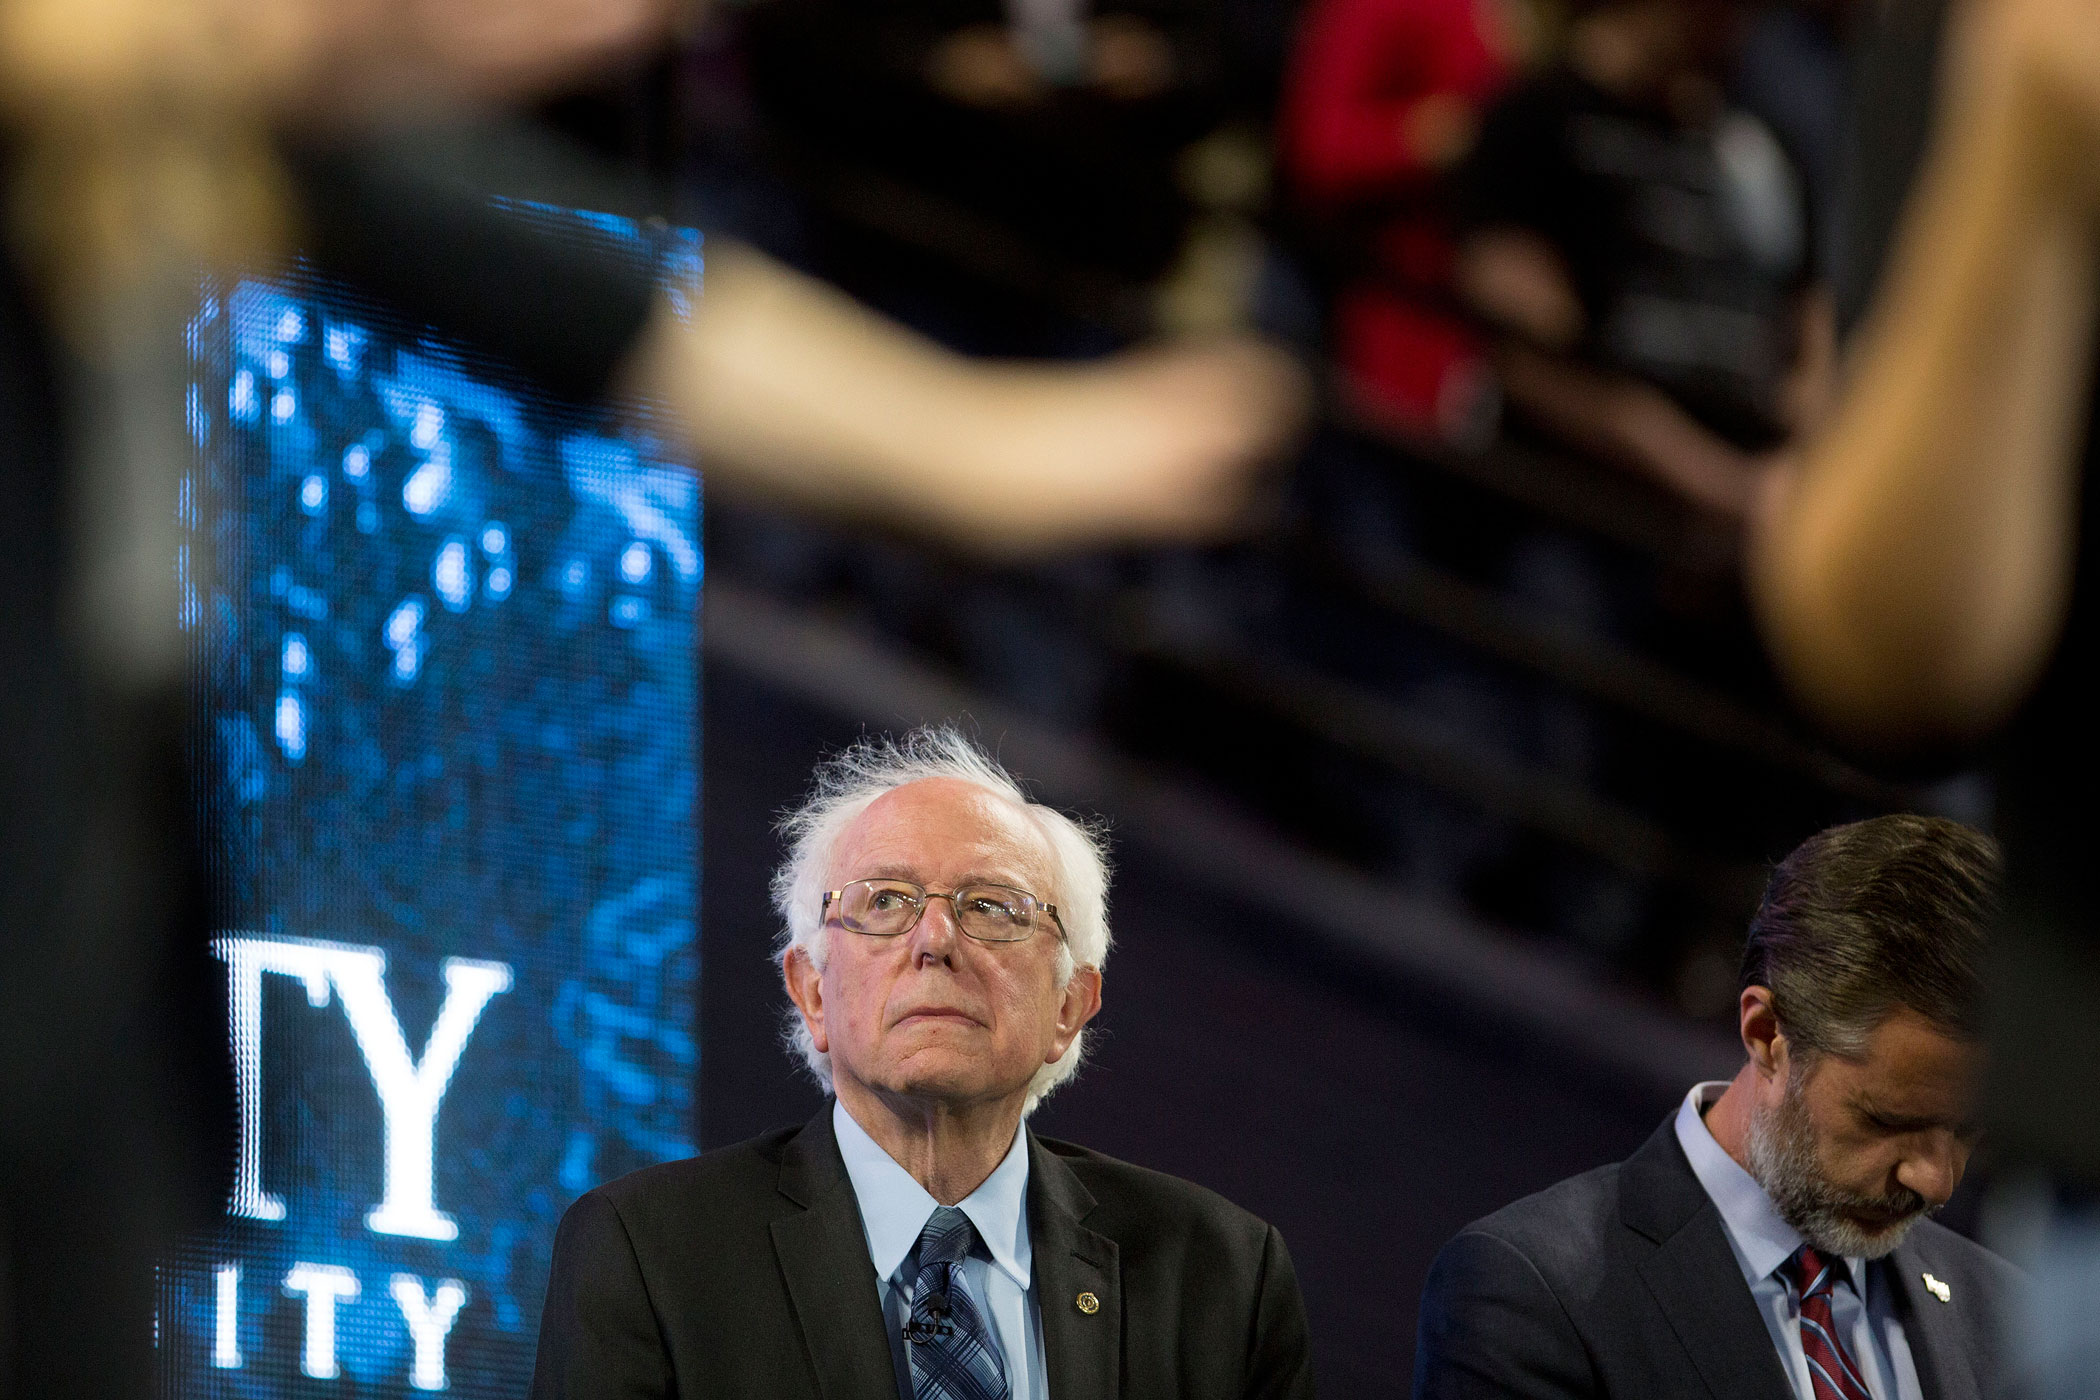 Senator Bernie Sanders, an independent from Vermont and 2016 Democratic presidential candidate, left, and Jerry Falwell Jr., president of Liberty University, listen to a prayer during a Liberty University Convocation in Lynchburg, Virginia, on Sept. 14, 2015. (Andrew Harrer—Bloomberg/Getty Images)